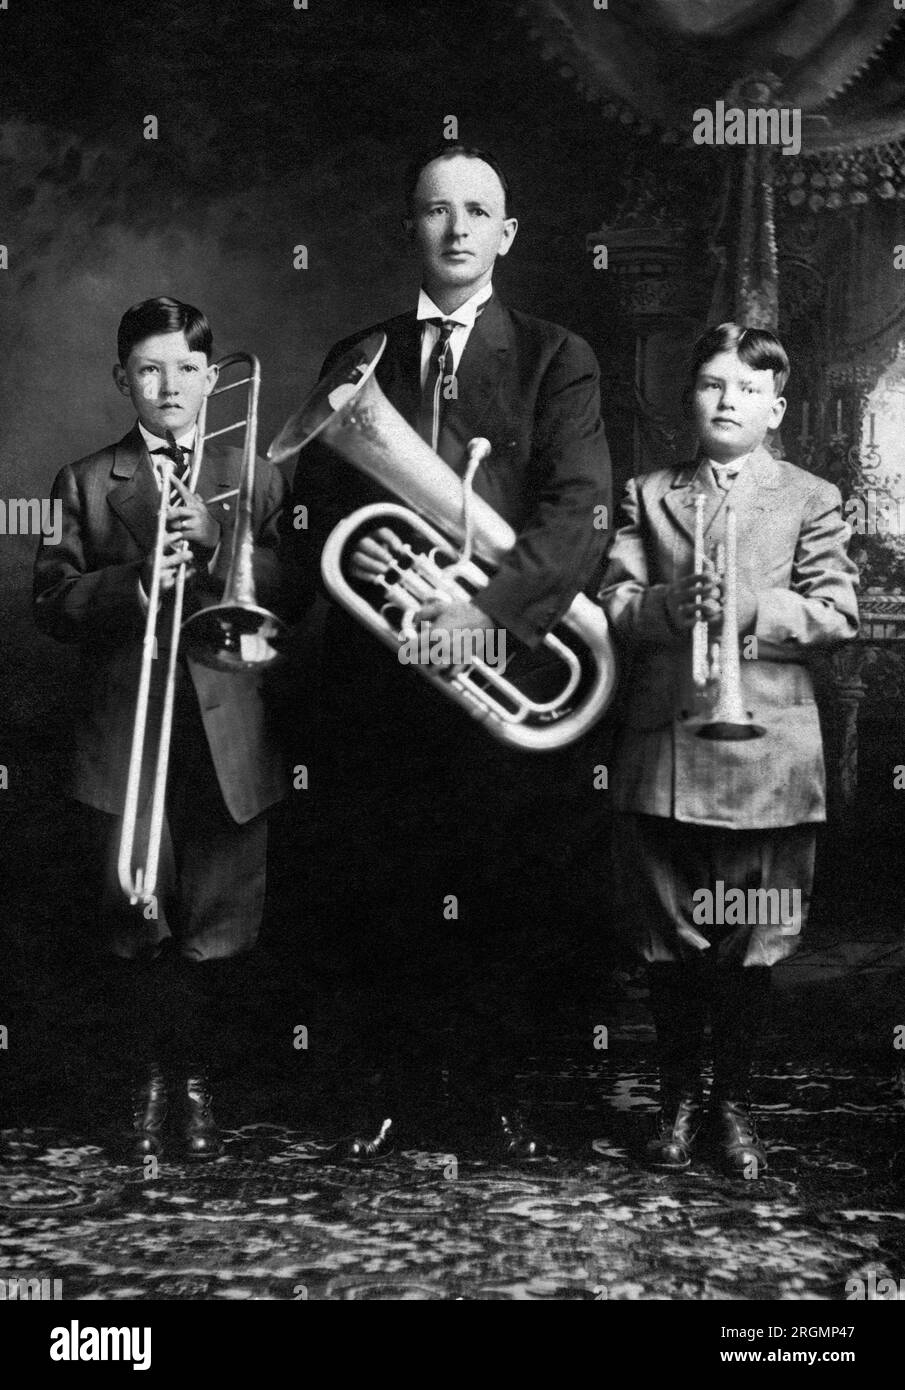 Portrait of Father holding Baritone Horn, and Two Sons, one with Trombone and one with Trumpet, White Hall, Illinois, USA, Cabinet Card, Olaf Holcomb, early 1900's Stock Photo